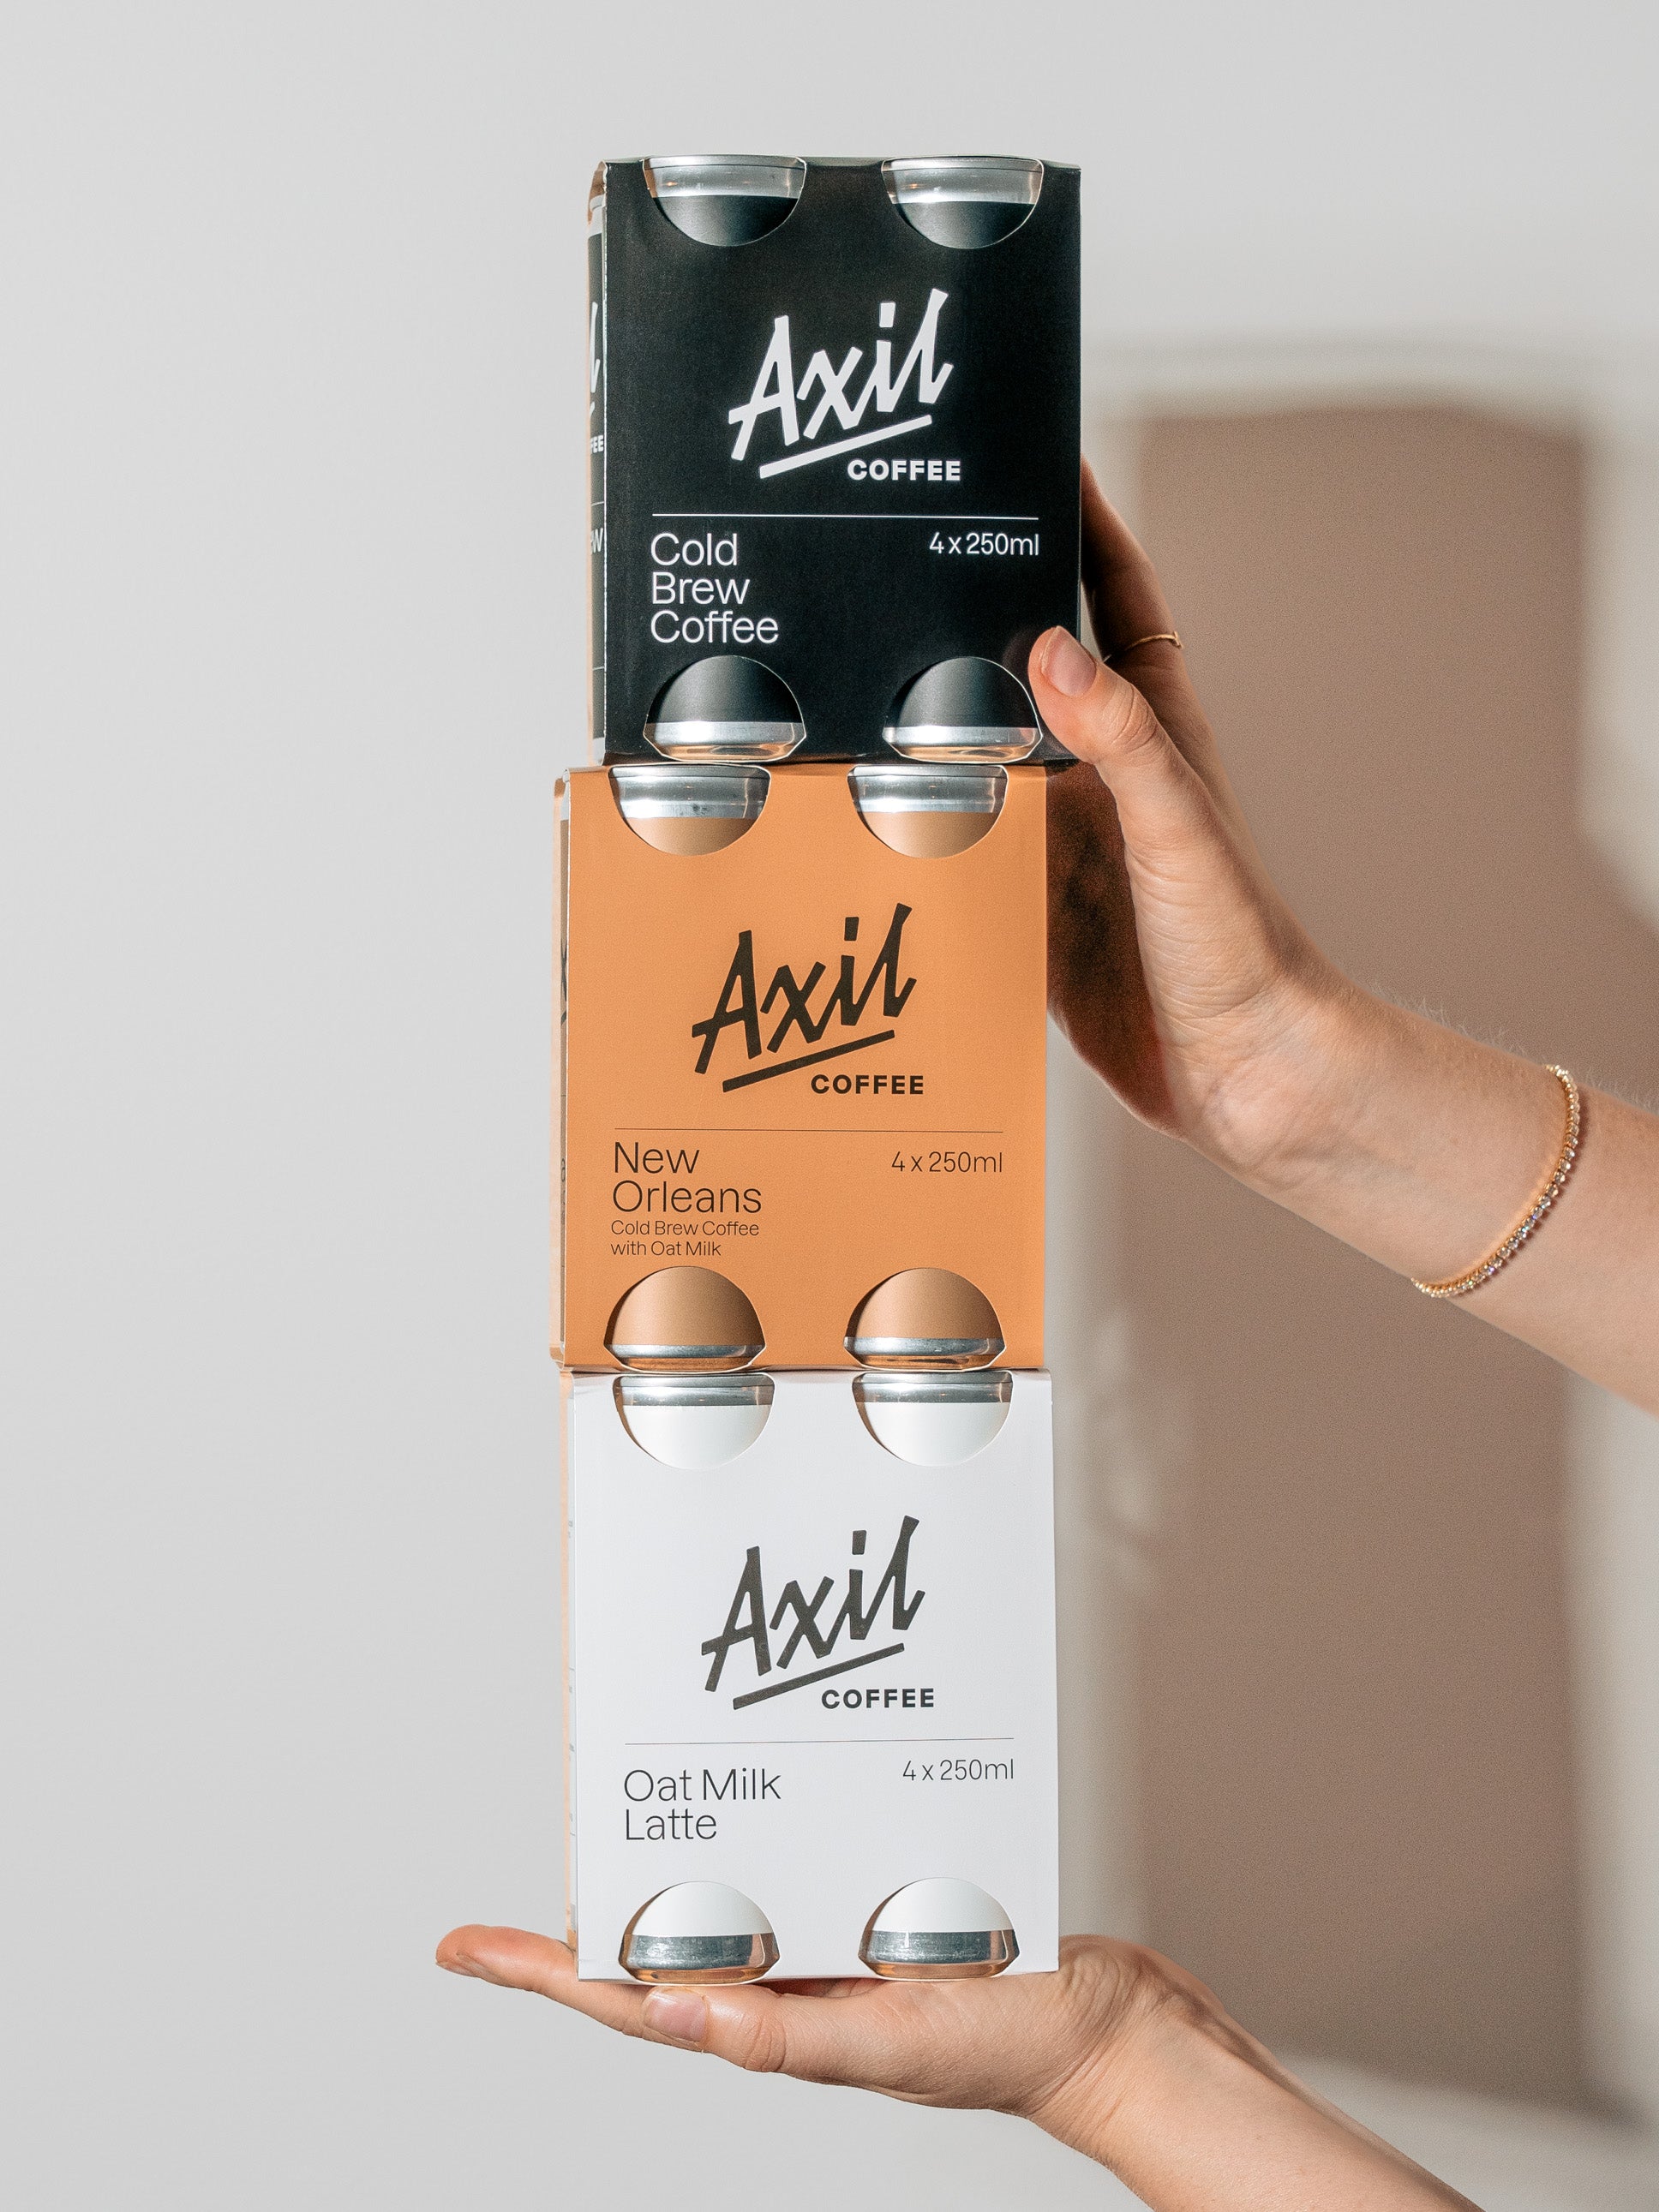 Sip anytime, anywhere. Get to know Axil's Canned Coffee.